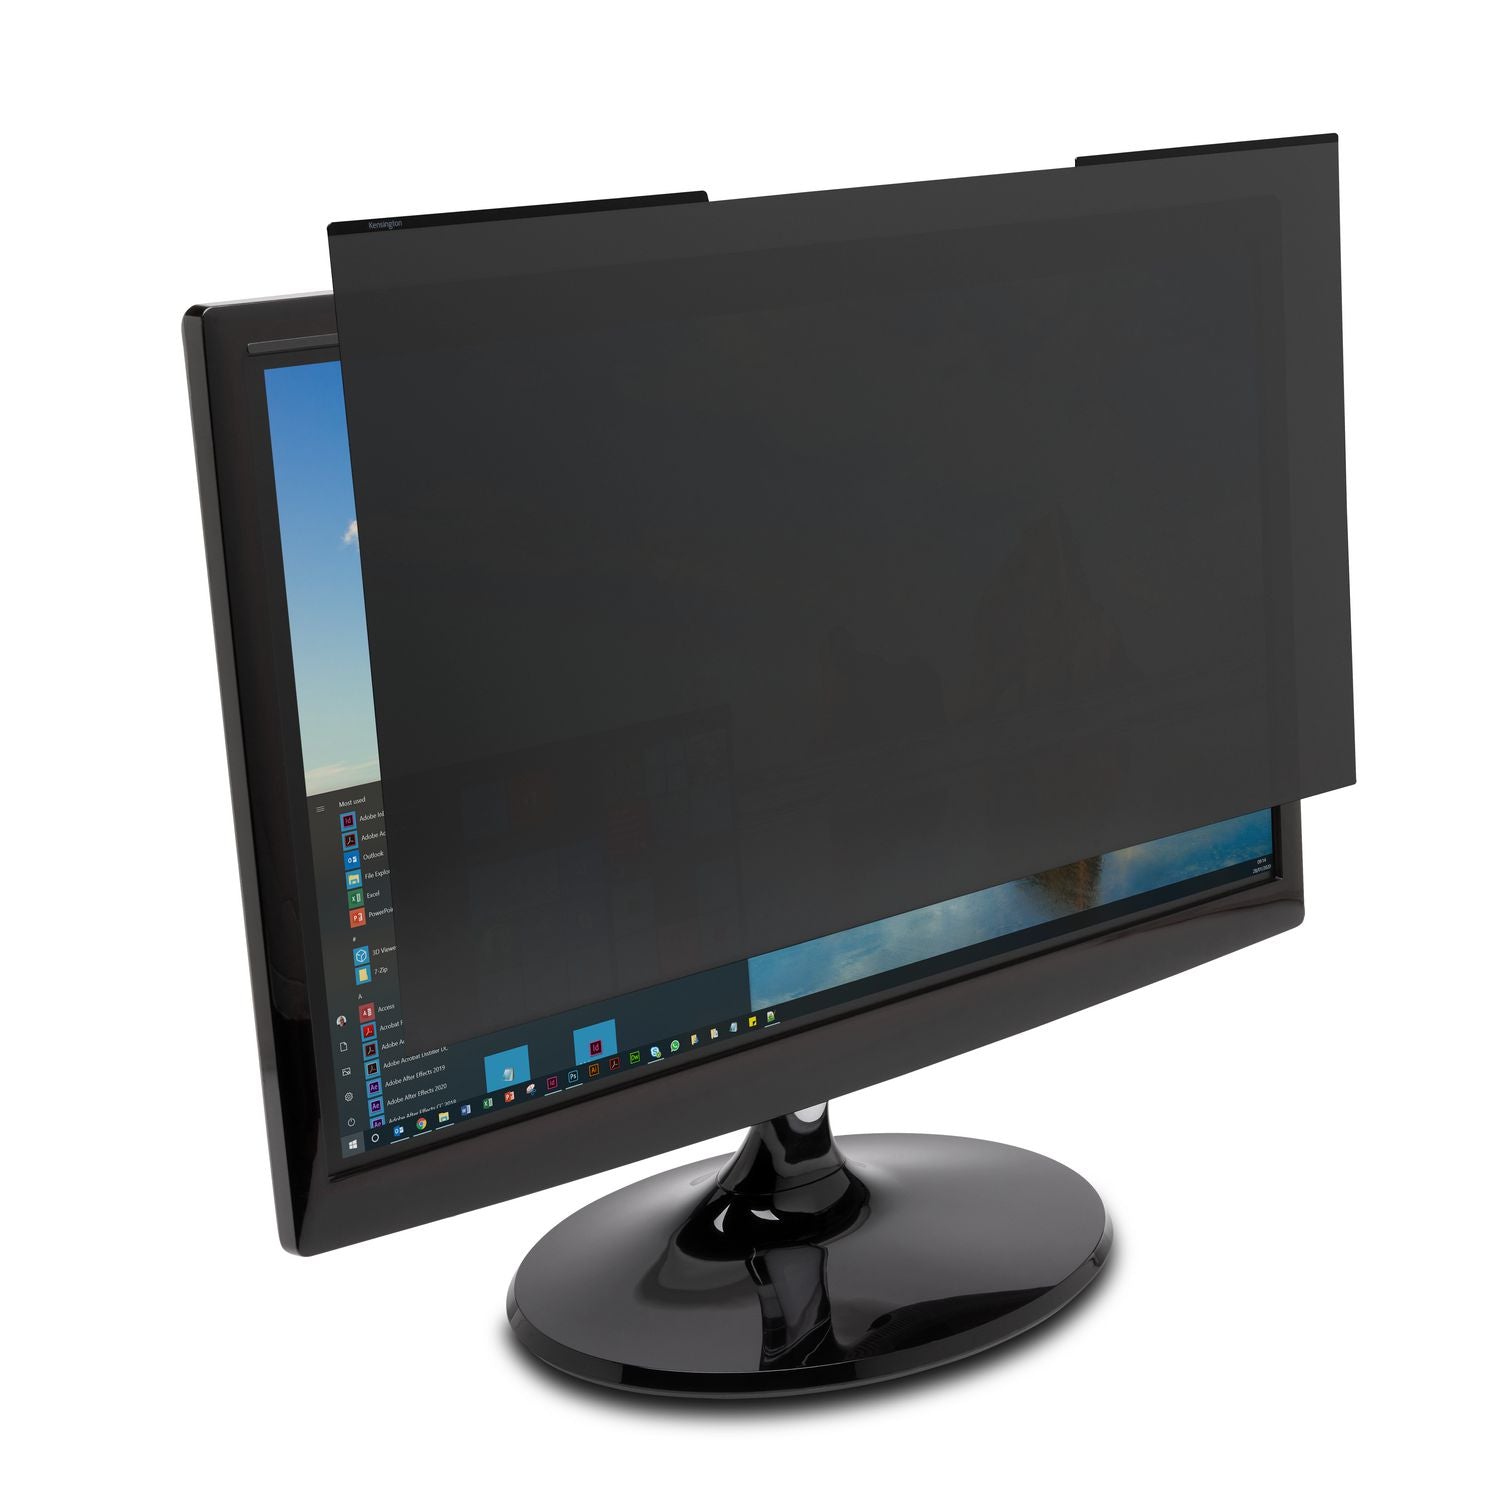 magnetic-monitor-privacy-screen-for-215-widescreen-flat-panel-monitors-169-aspect-ratio_kmw58354 - 1